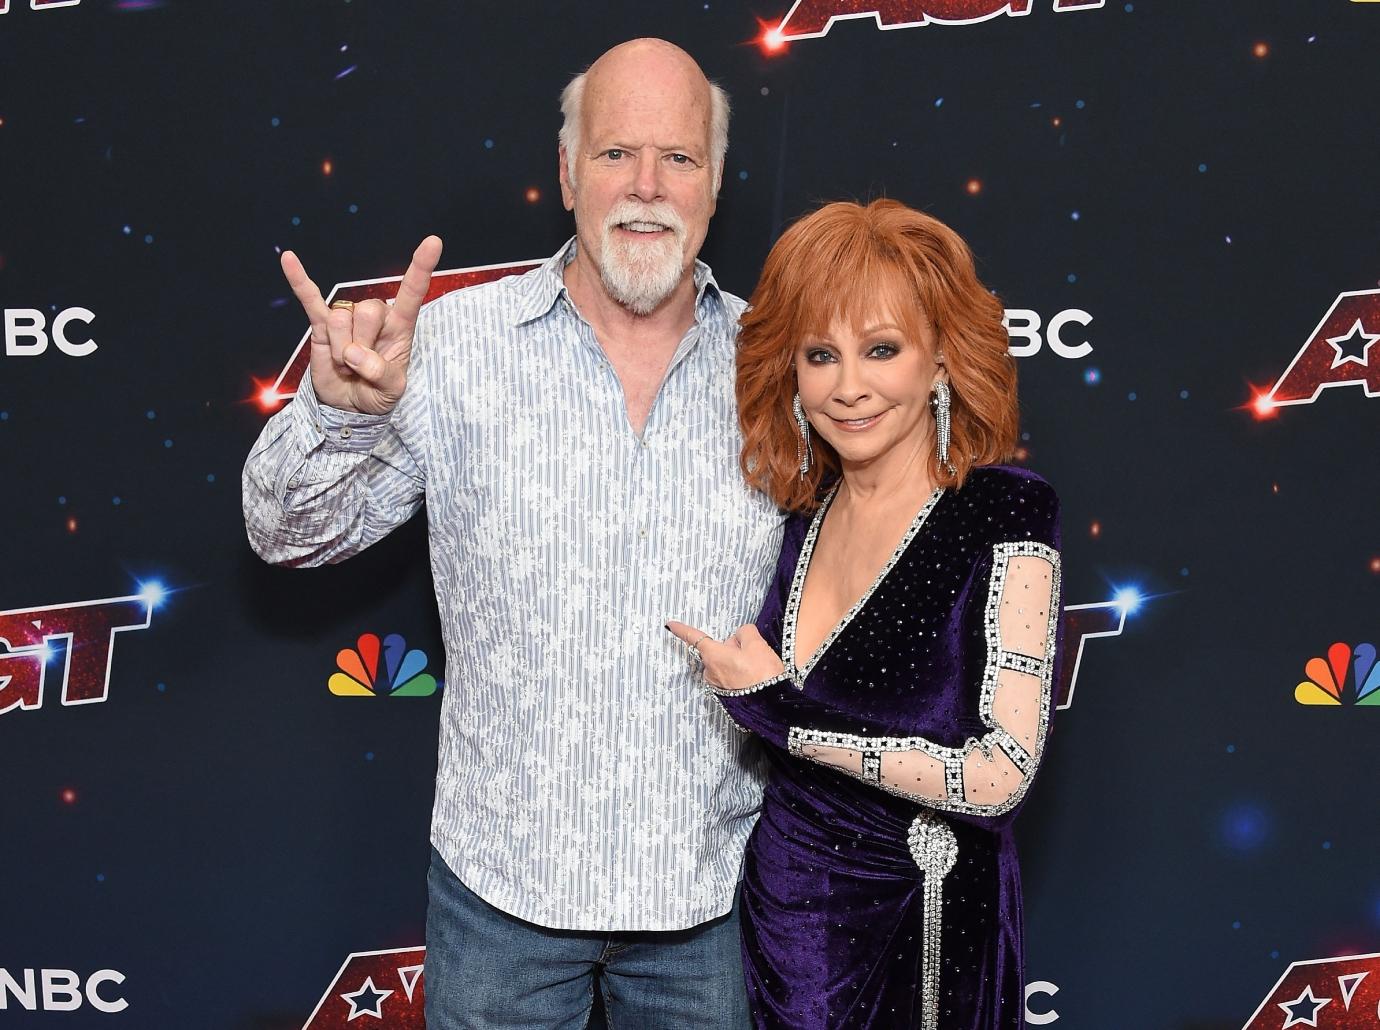 Did Reba McEntire Get Married? 'The Voice' Judge Wears Massive Ring